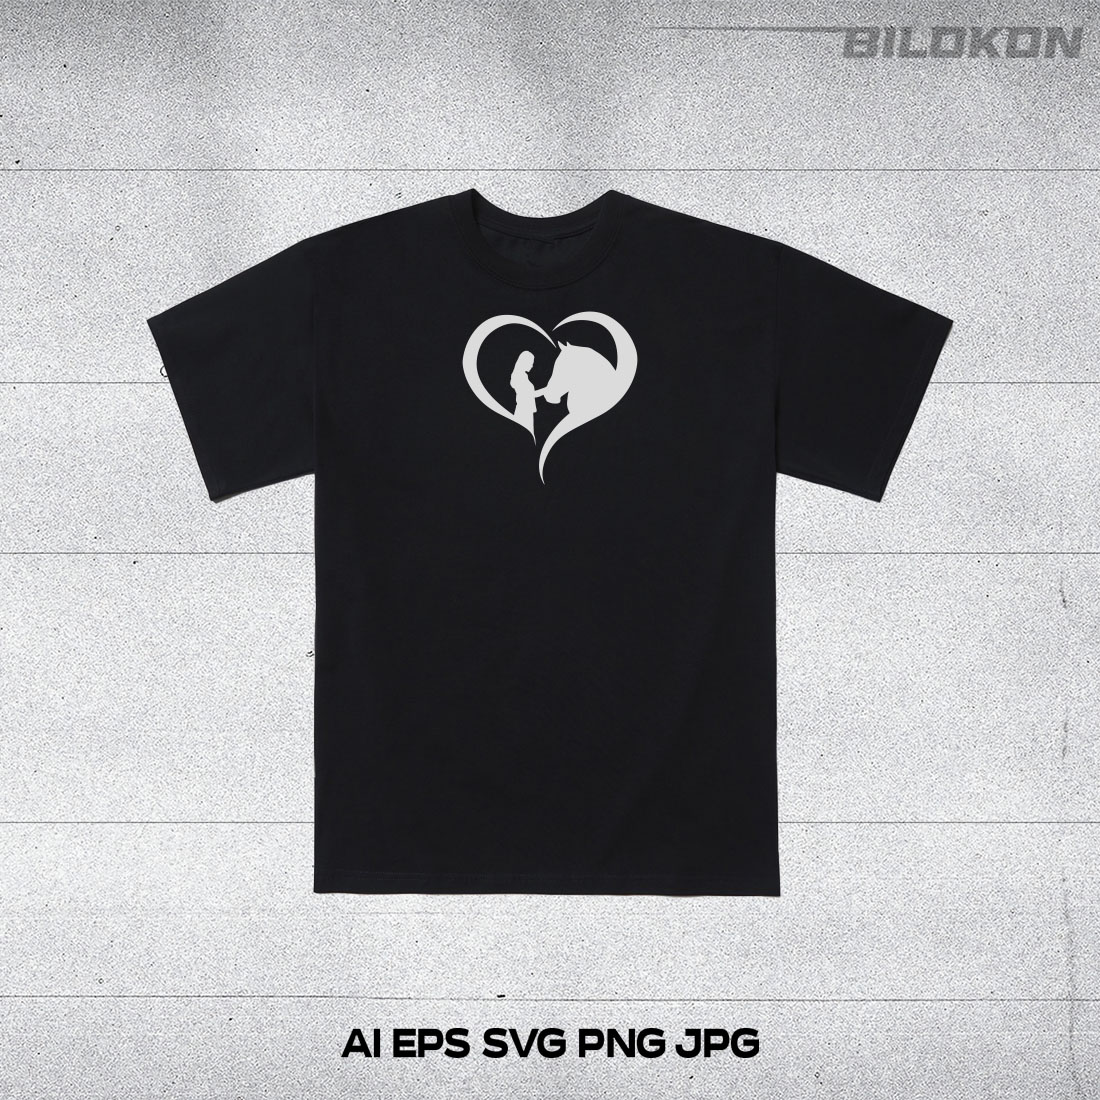 Black t - shirt with a white heart on it.